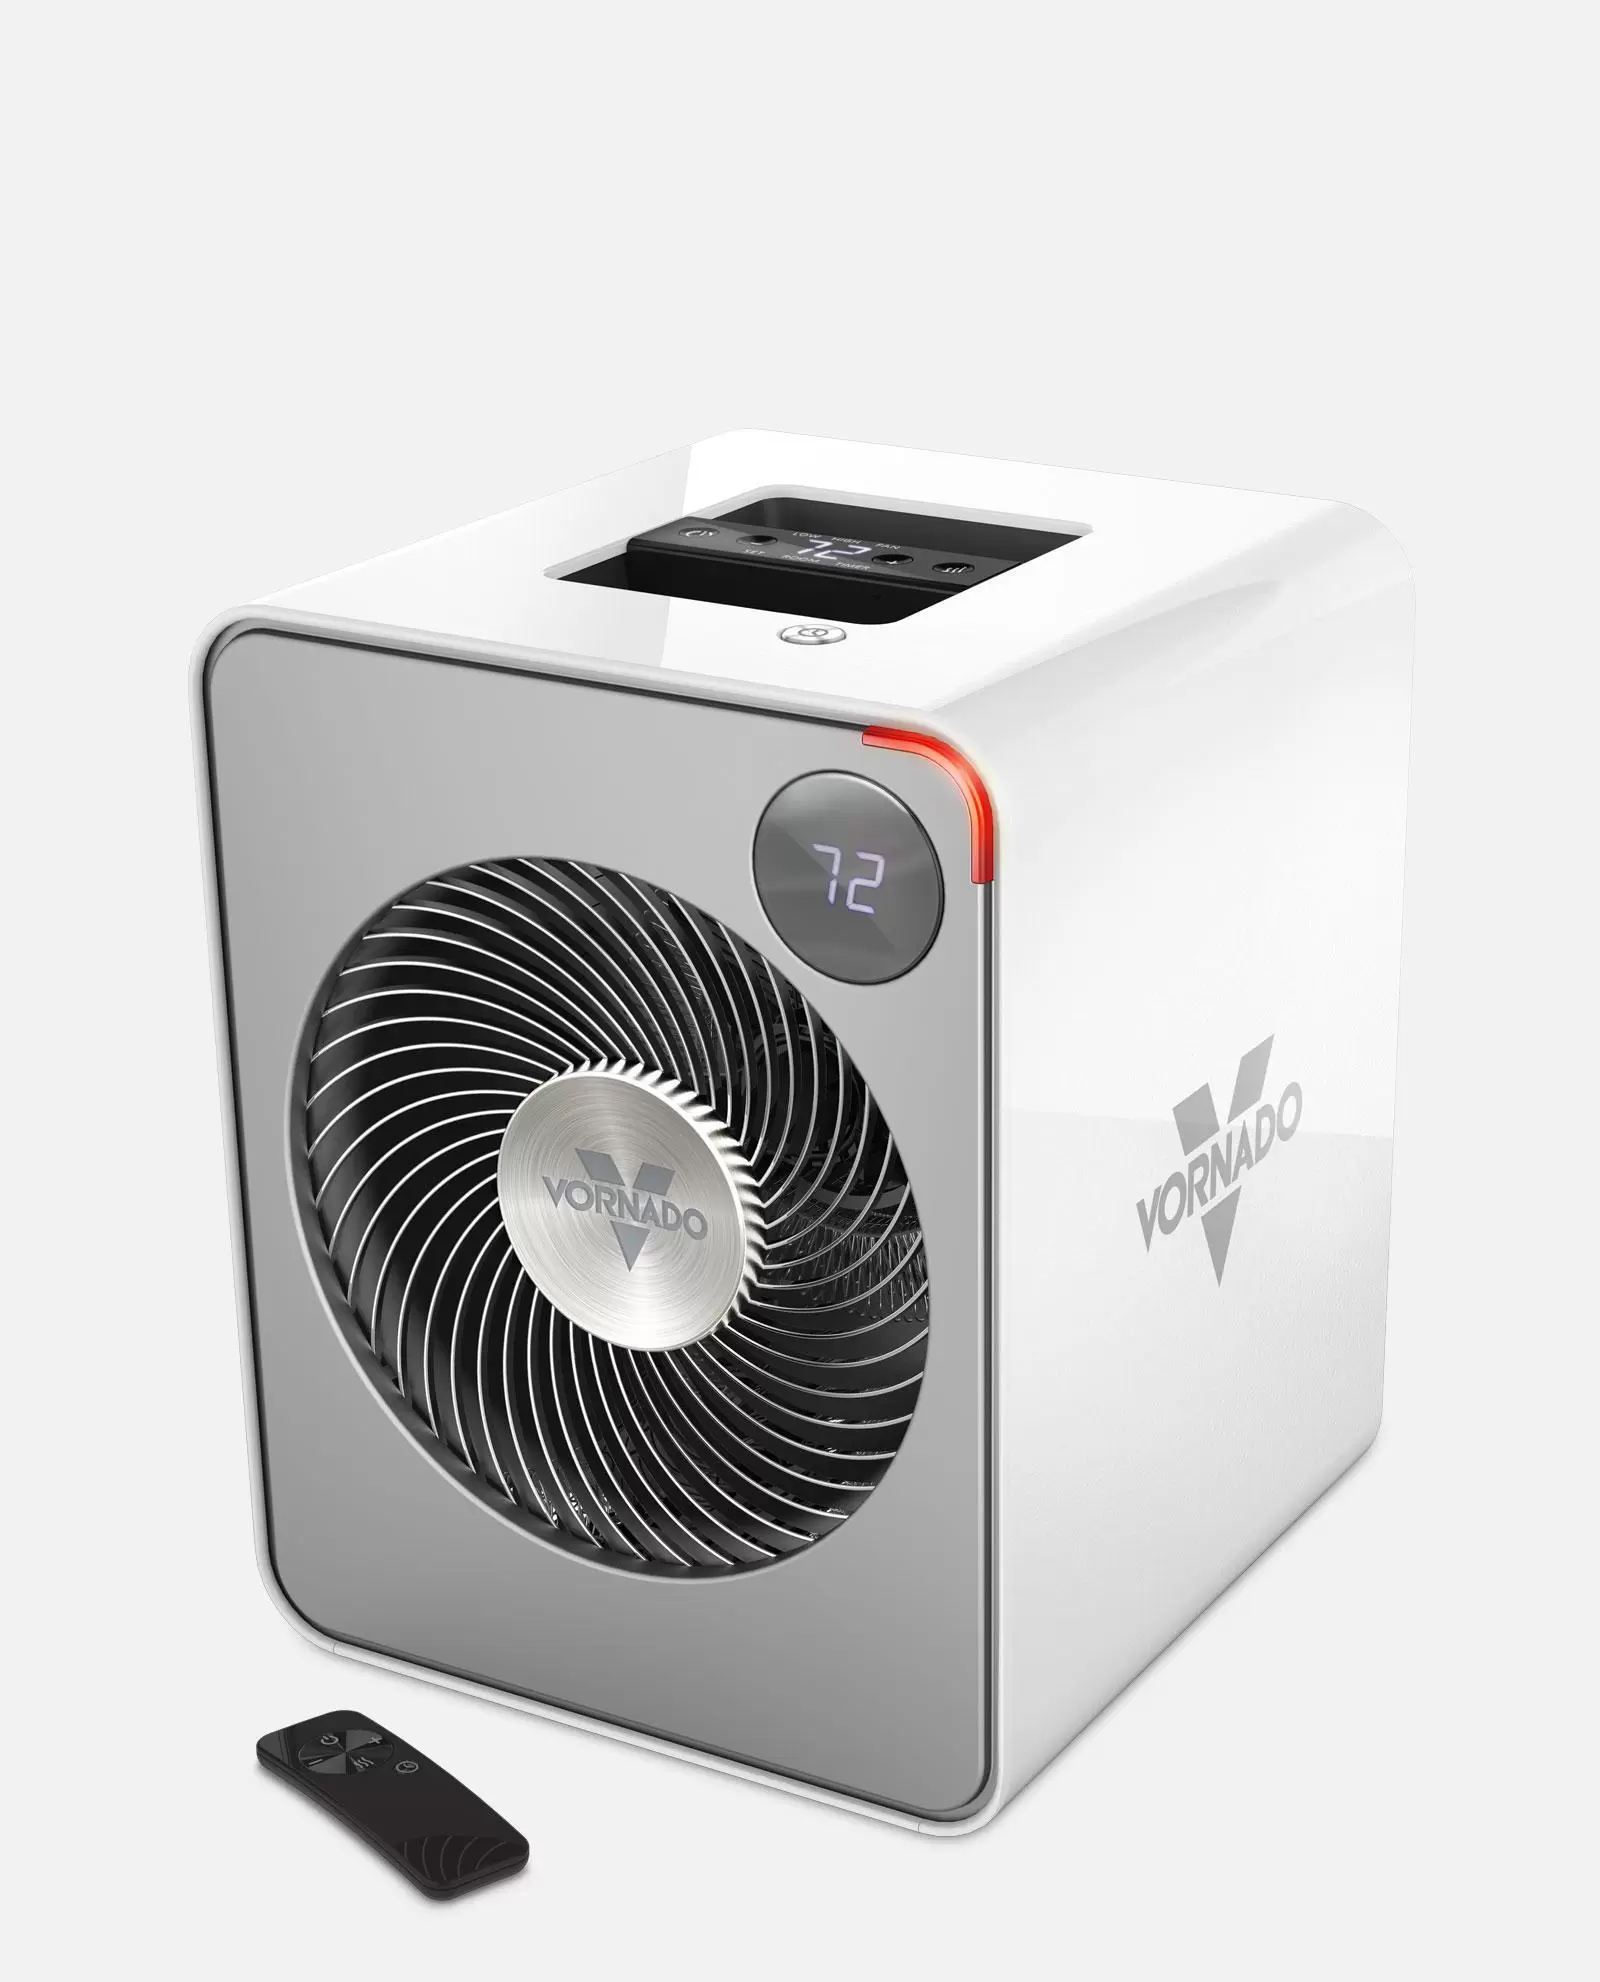 White vmh500 personal metal heater and remote